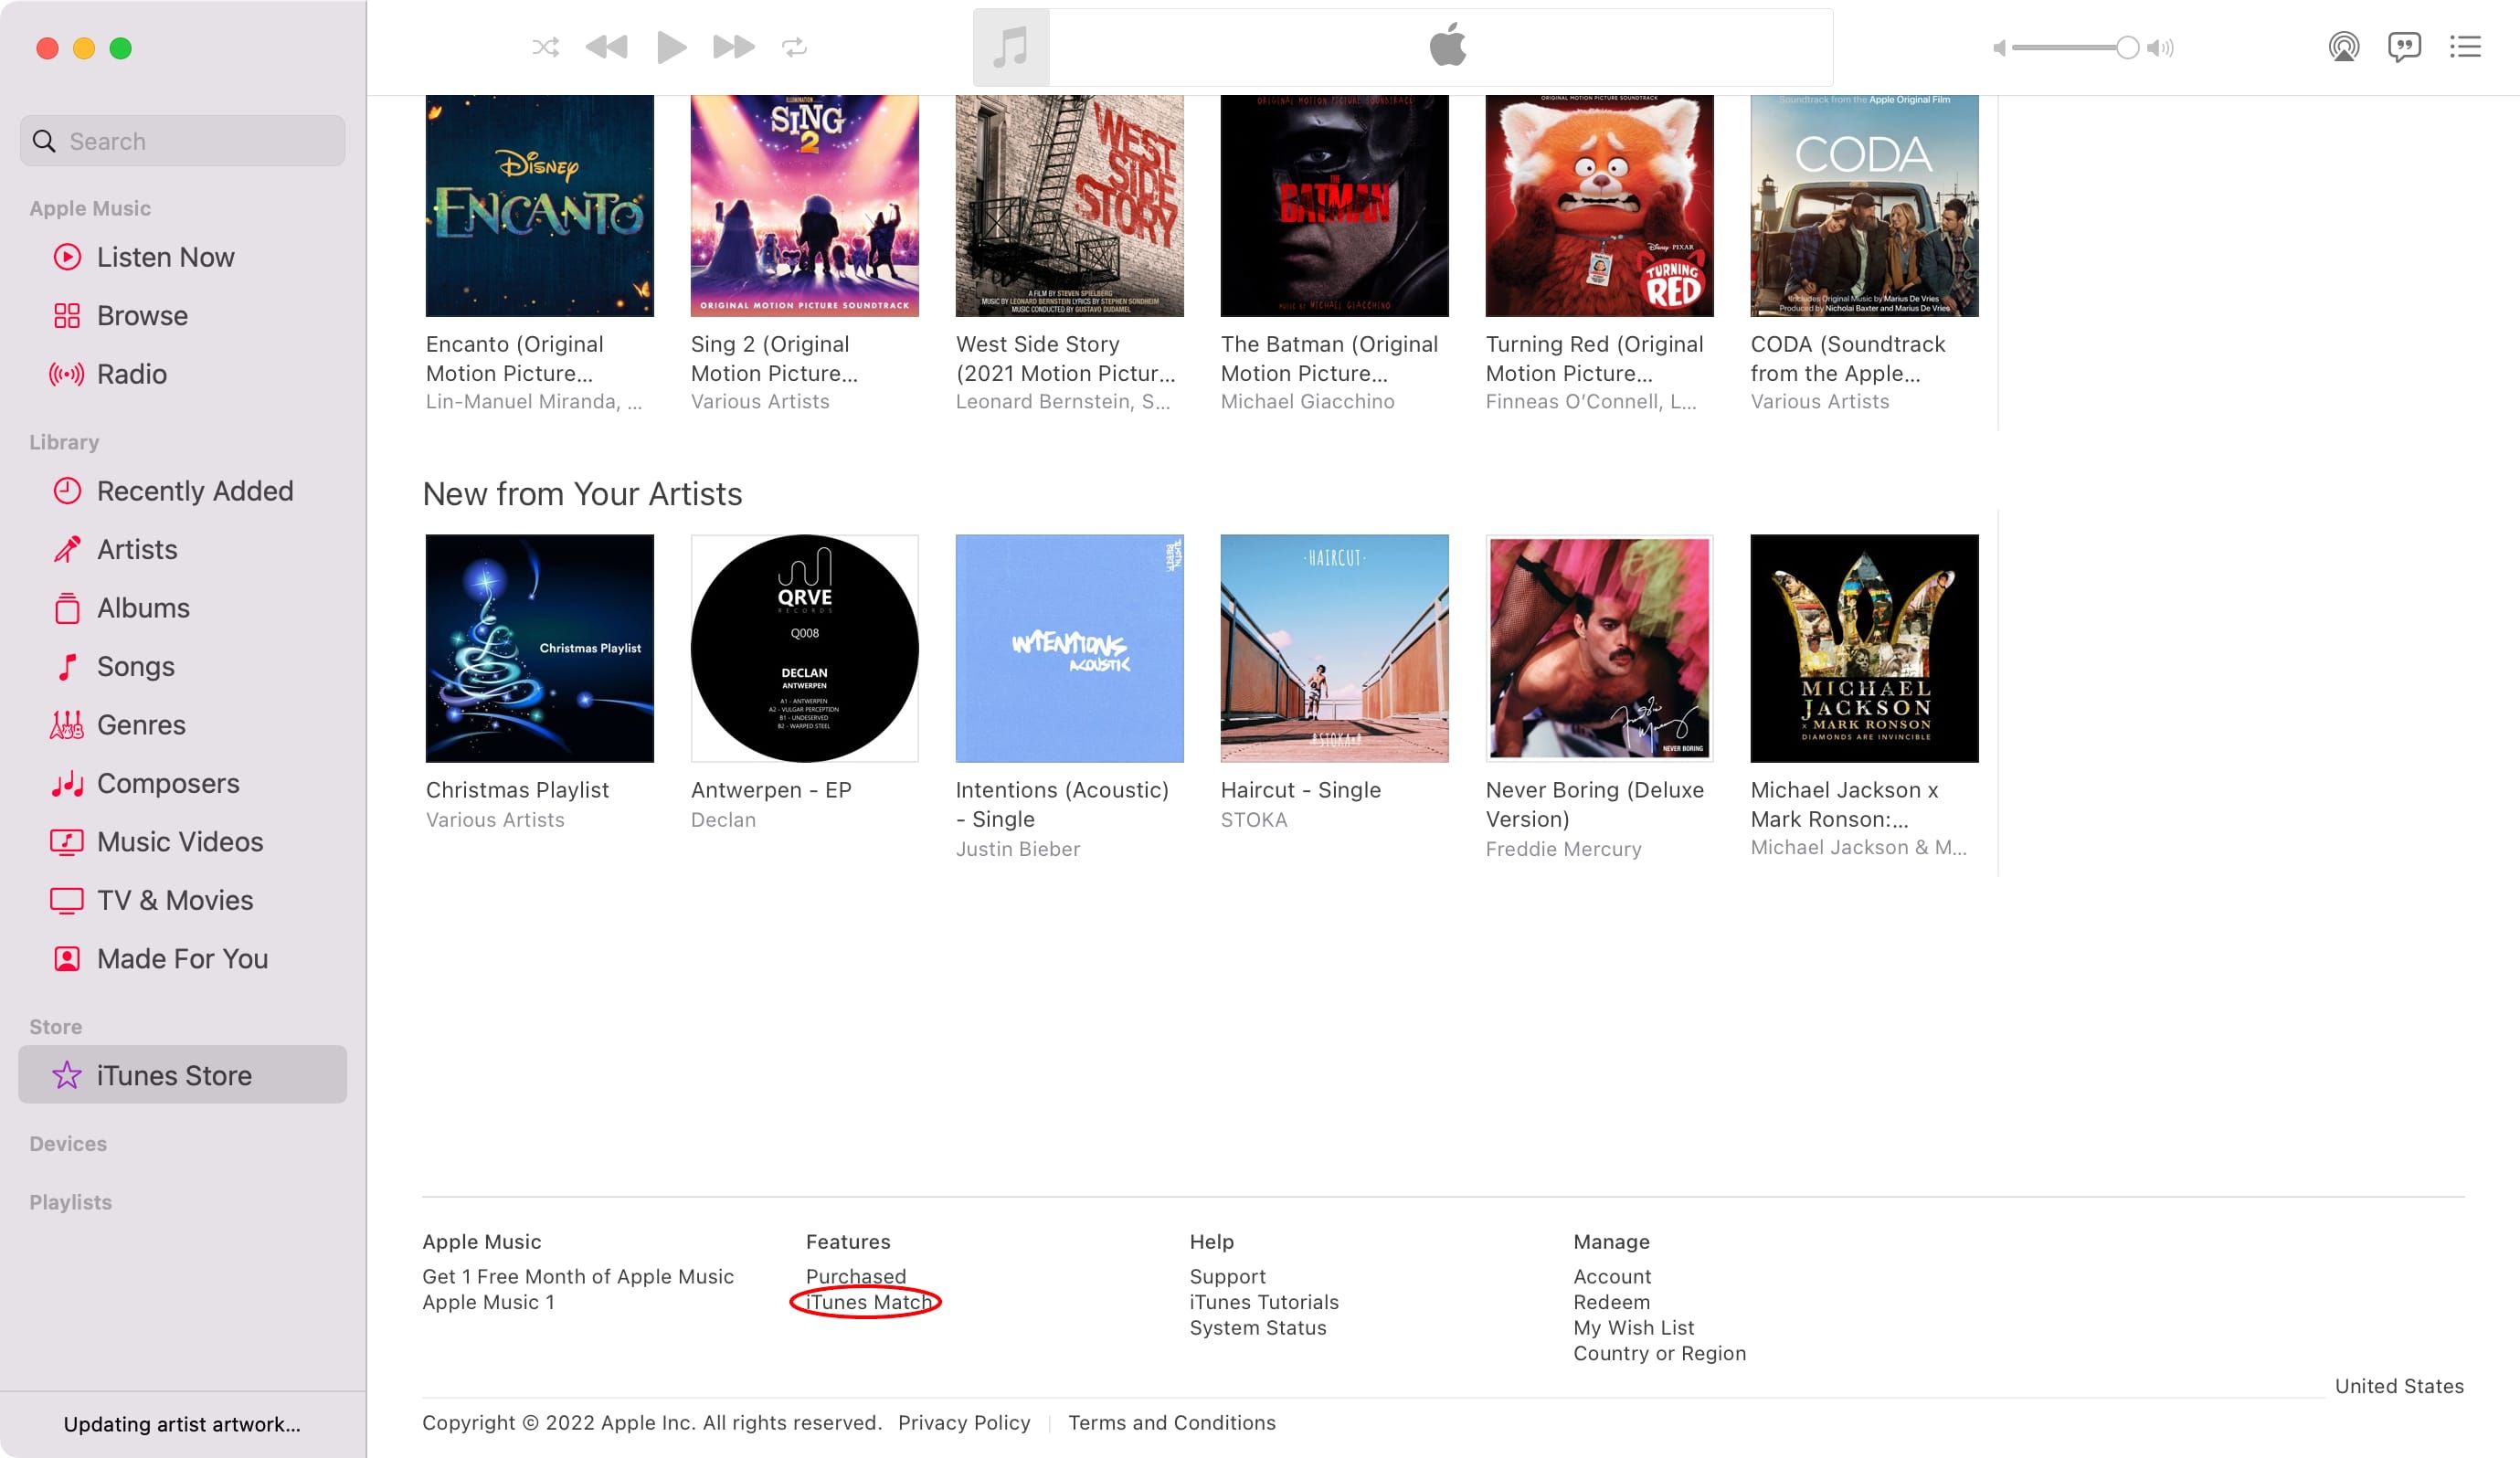 A macOS screenshot displaying the iTunes Store section in Apple's Music app, with the iTunes Match option highlighted